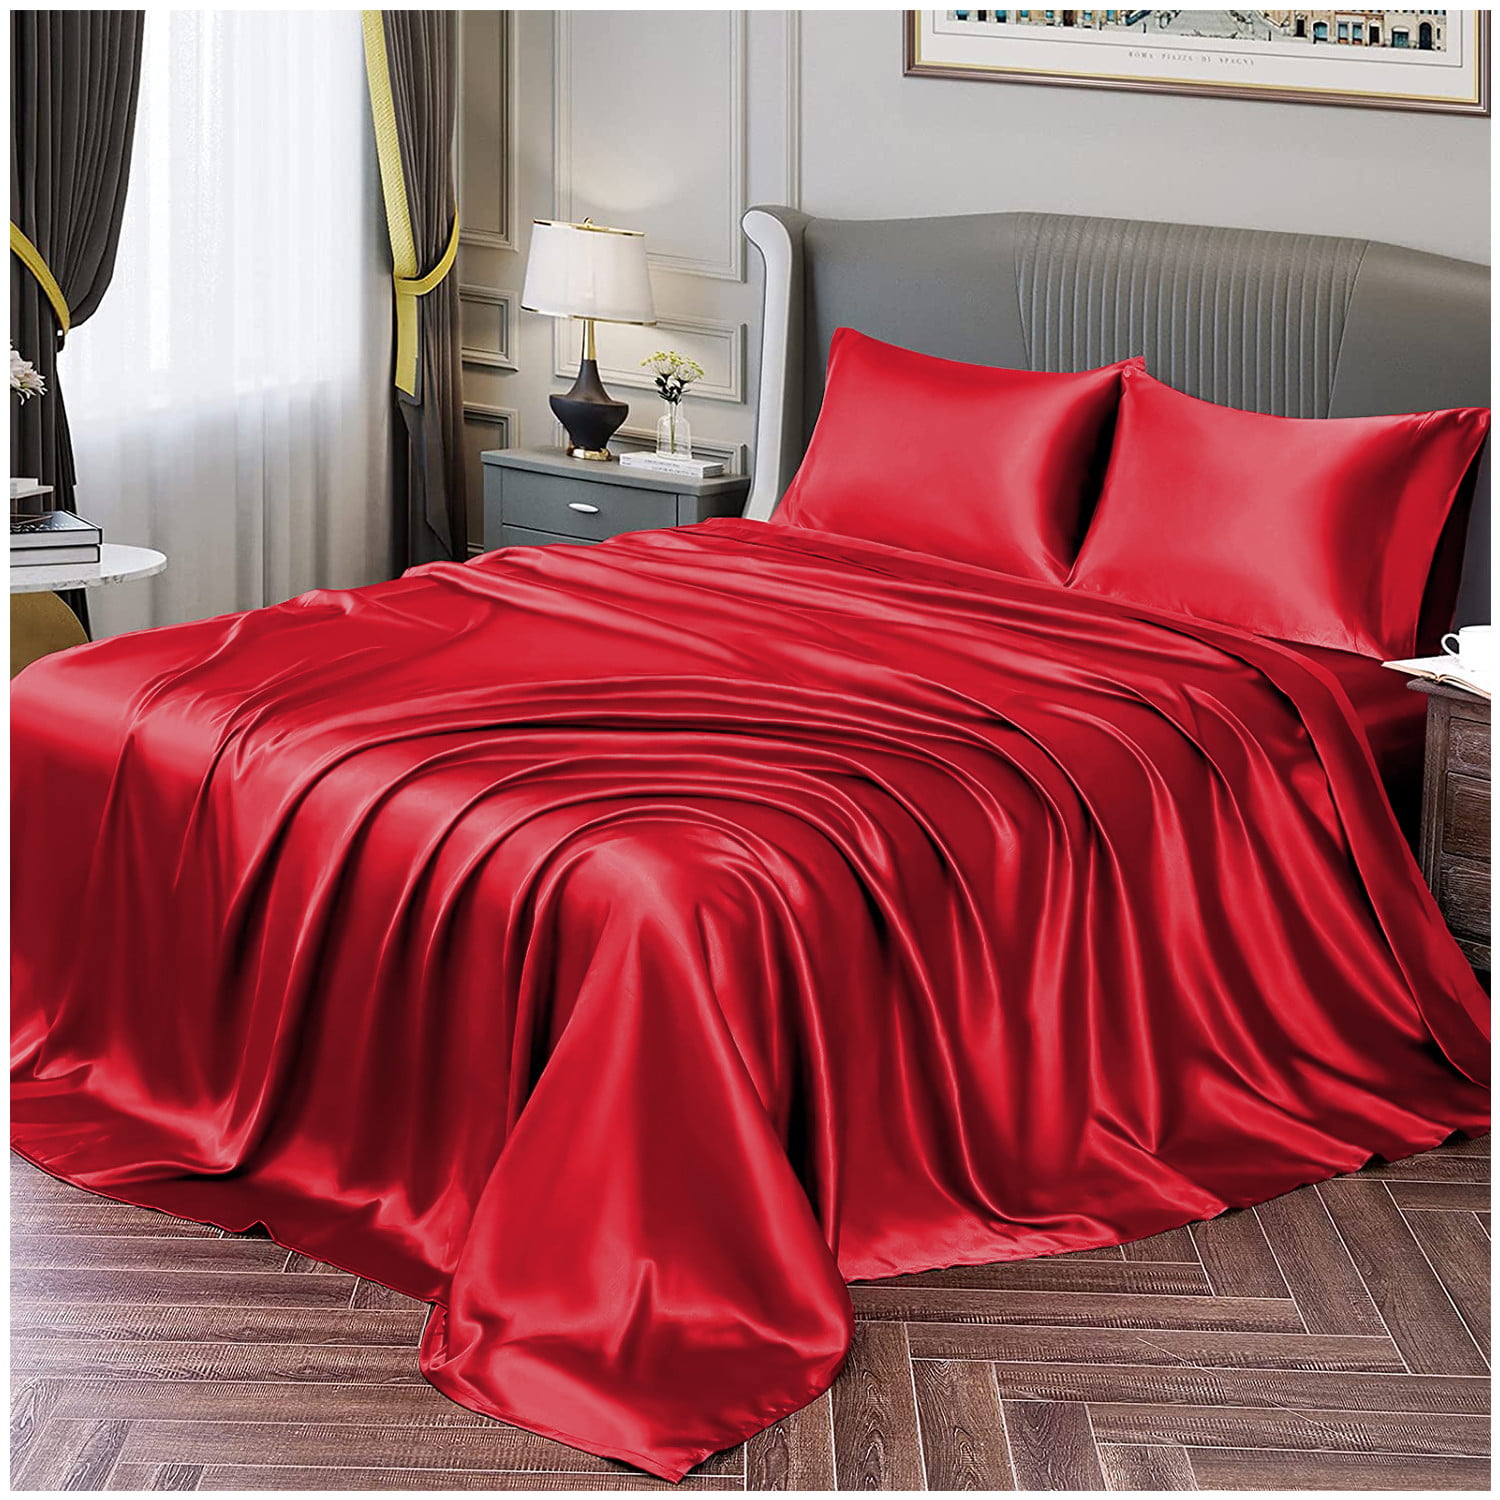 Satin Silk Flat Bed Sheet with Deep Pocket Twin Full Queen King Soft & Smooth 